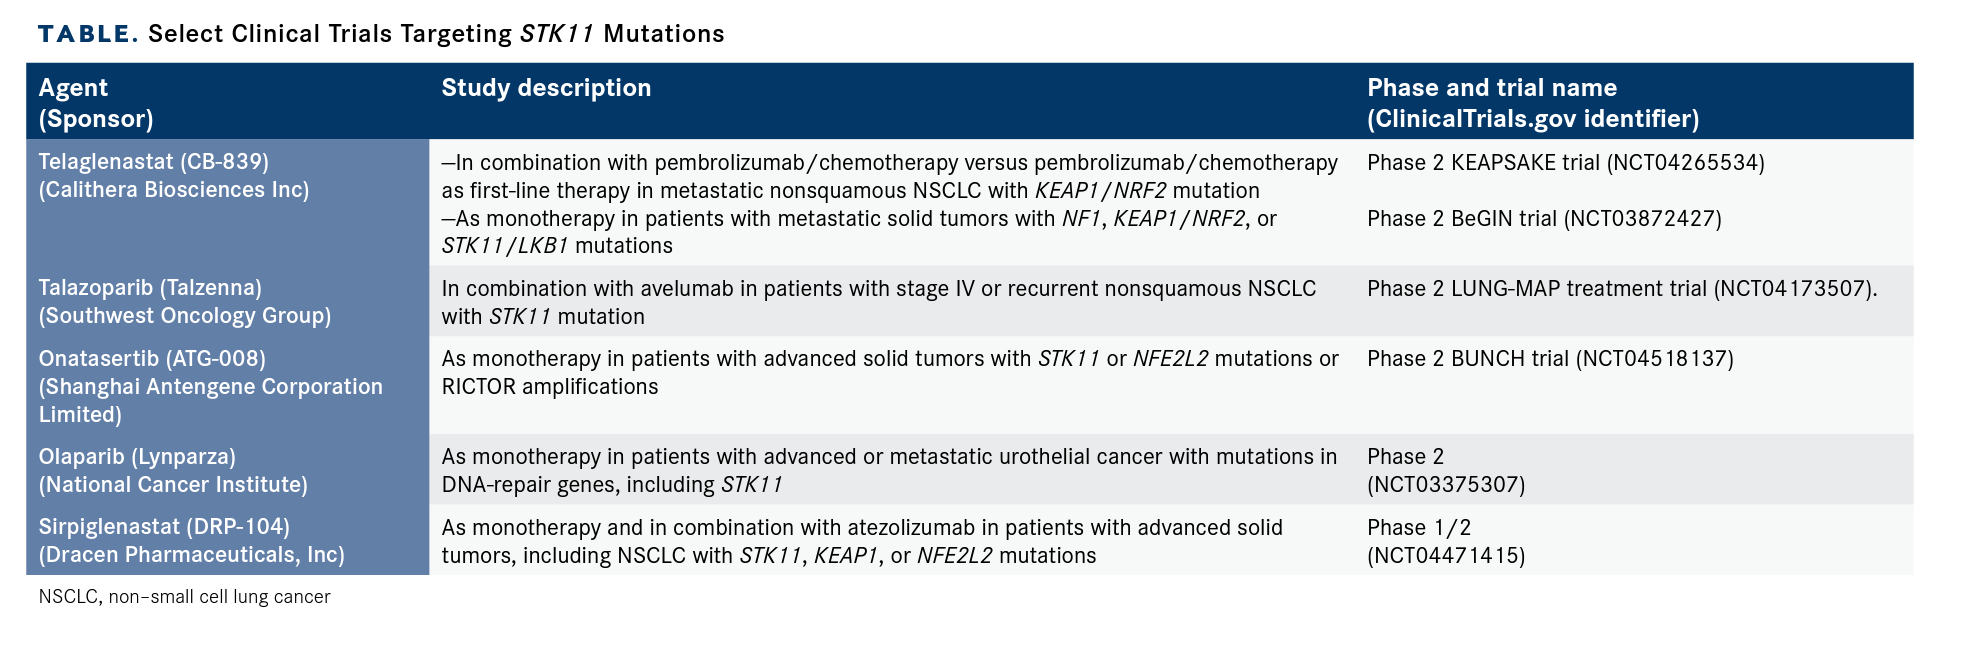 Select Clinical Trials Targeting STK11 Mutations